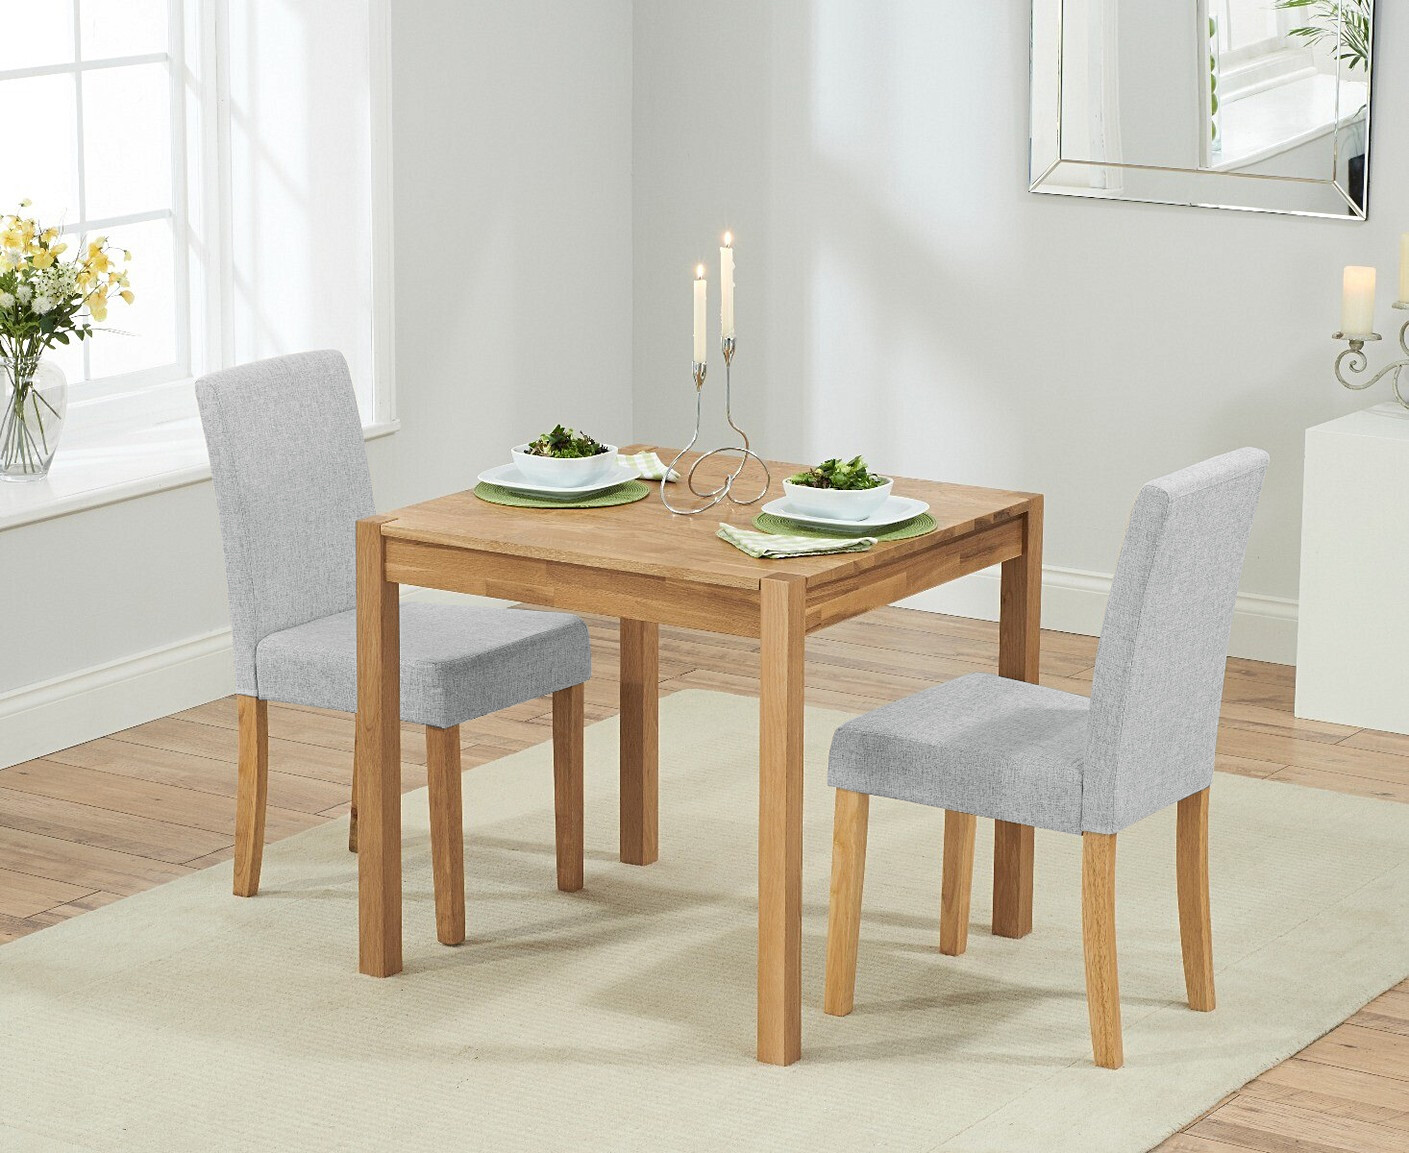 Photo 3 of York 80cm solid oak dining table with 4 charcoal lila chairs